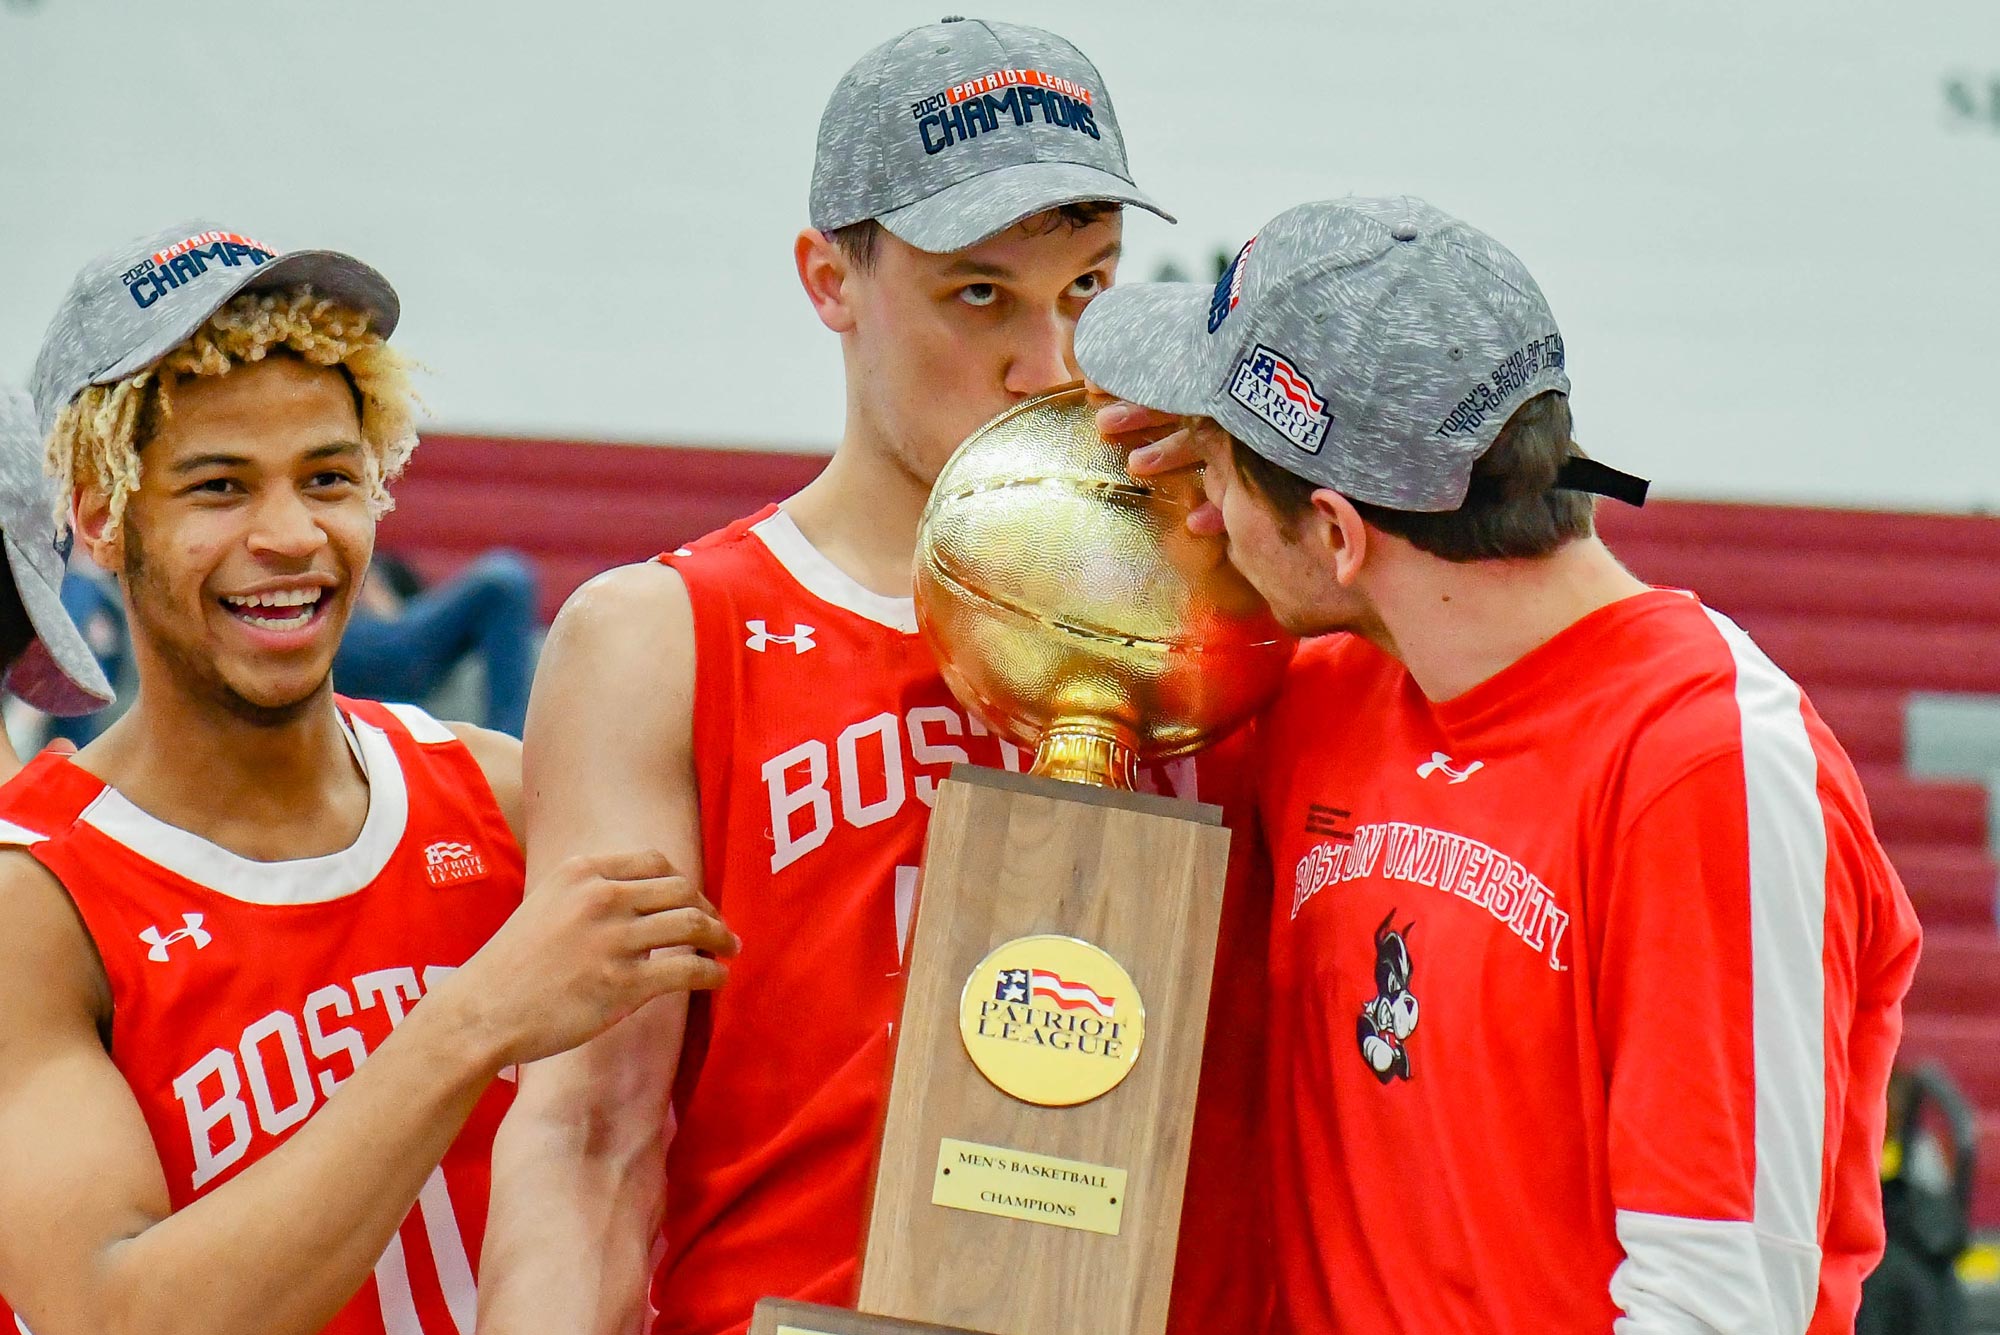 Tournament Canceled, but Title in Hand, BU Men's Basketball Players Bask in  Moment | BU Today | Boston University